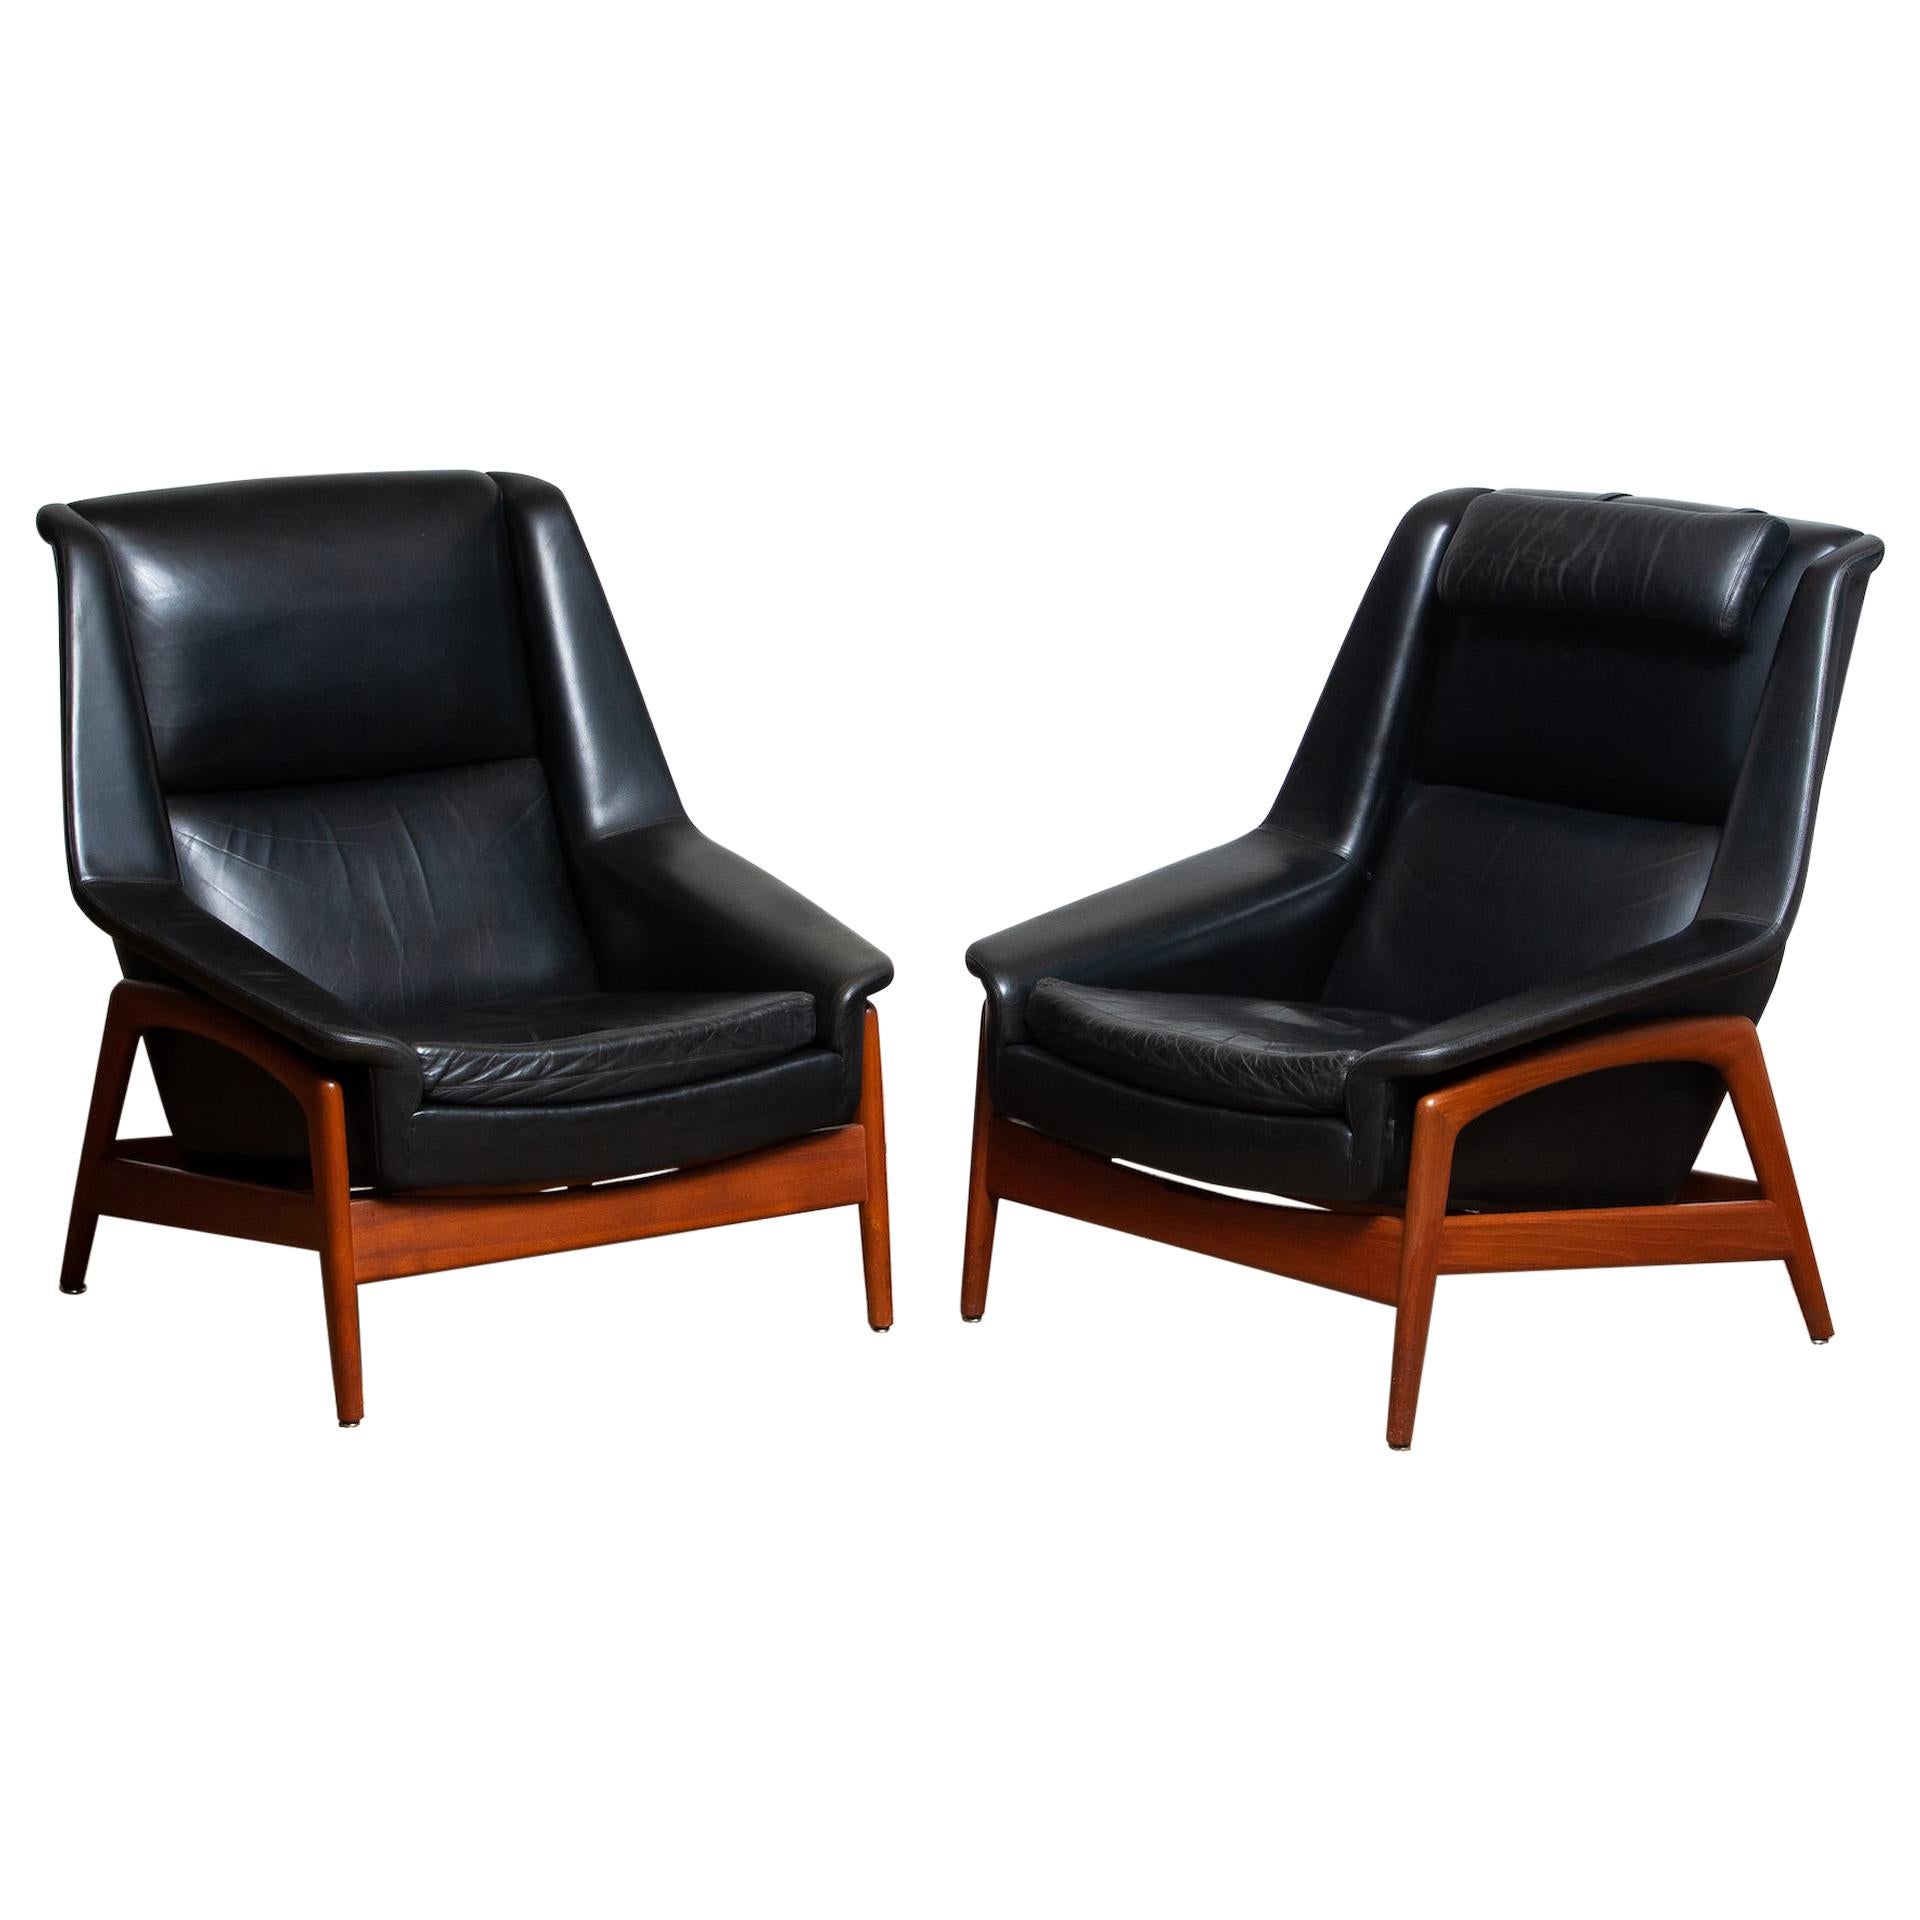 Stunning set of two easy or lounge chair in teak and upholstered with black leather by Folke Ohlsson for DUX, Sweden, model: Profil overall in good and both in original condition. Note the there is one head cushion.